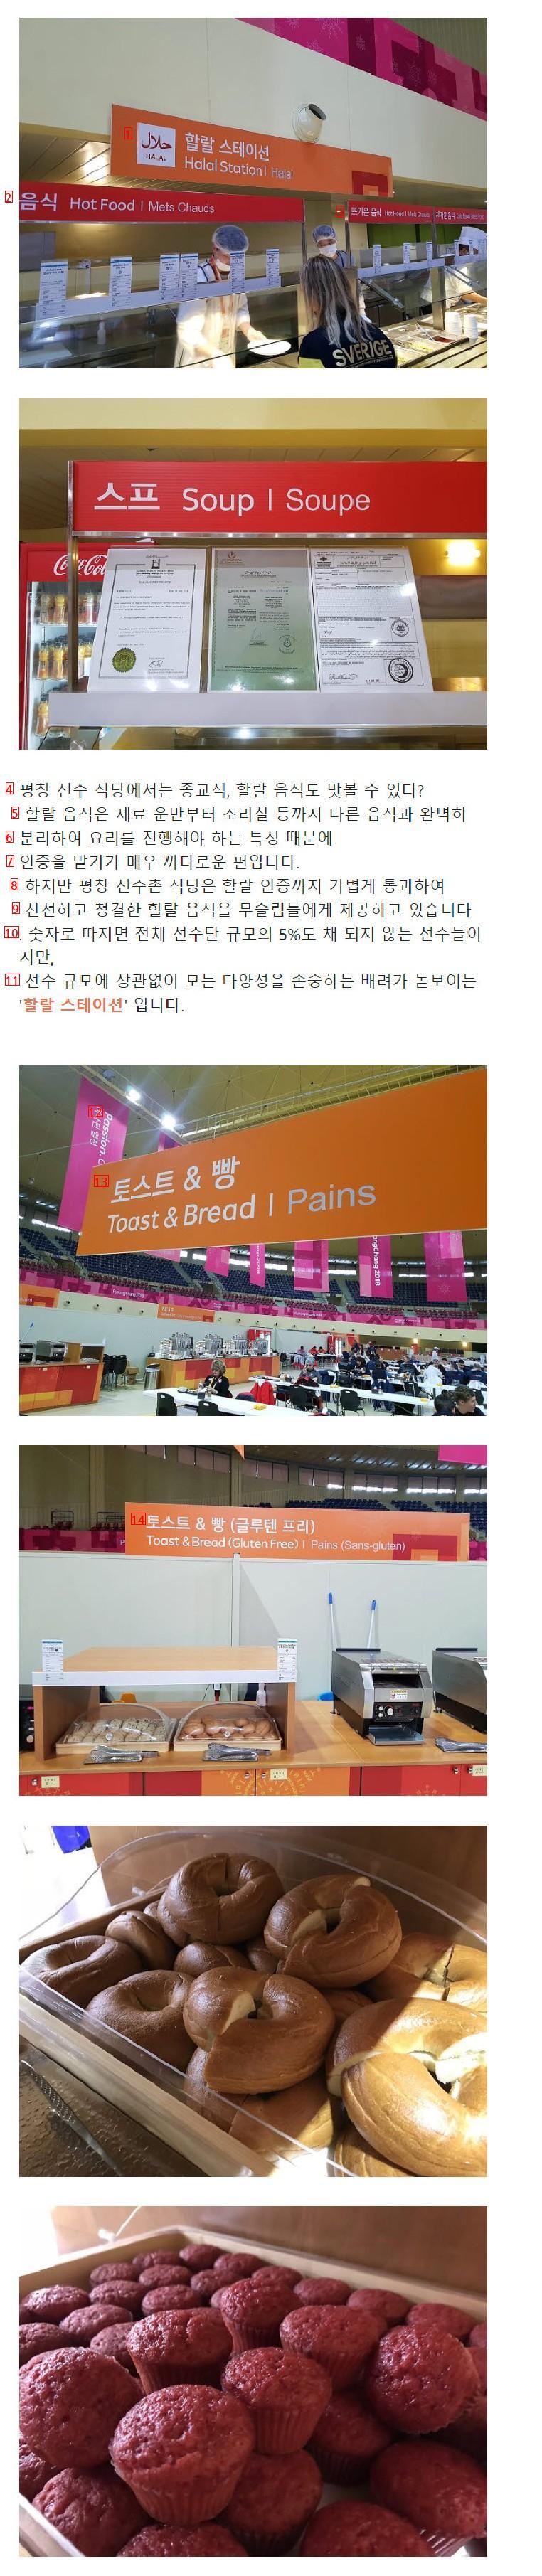 At the time of the PyeongChang Olympics, the restaurant class in the athletes' village